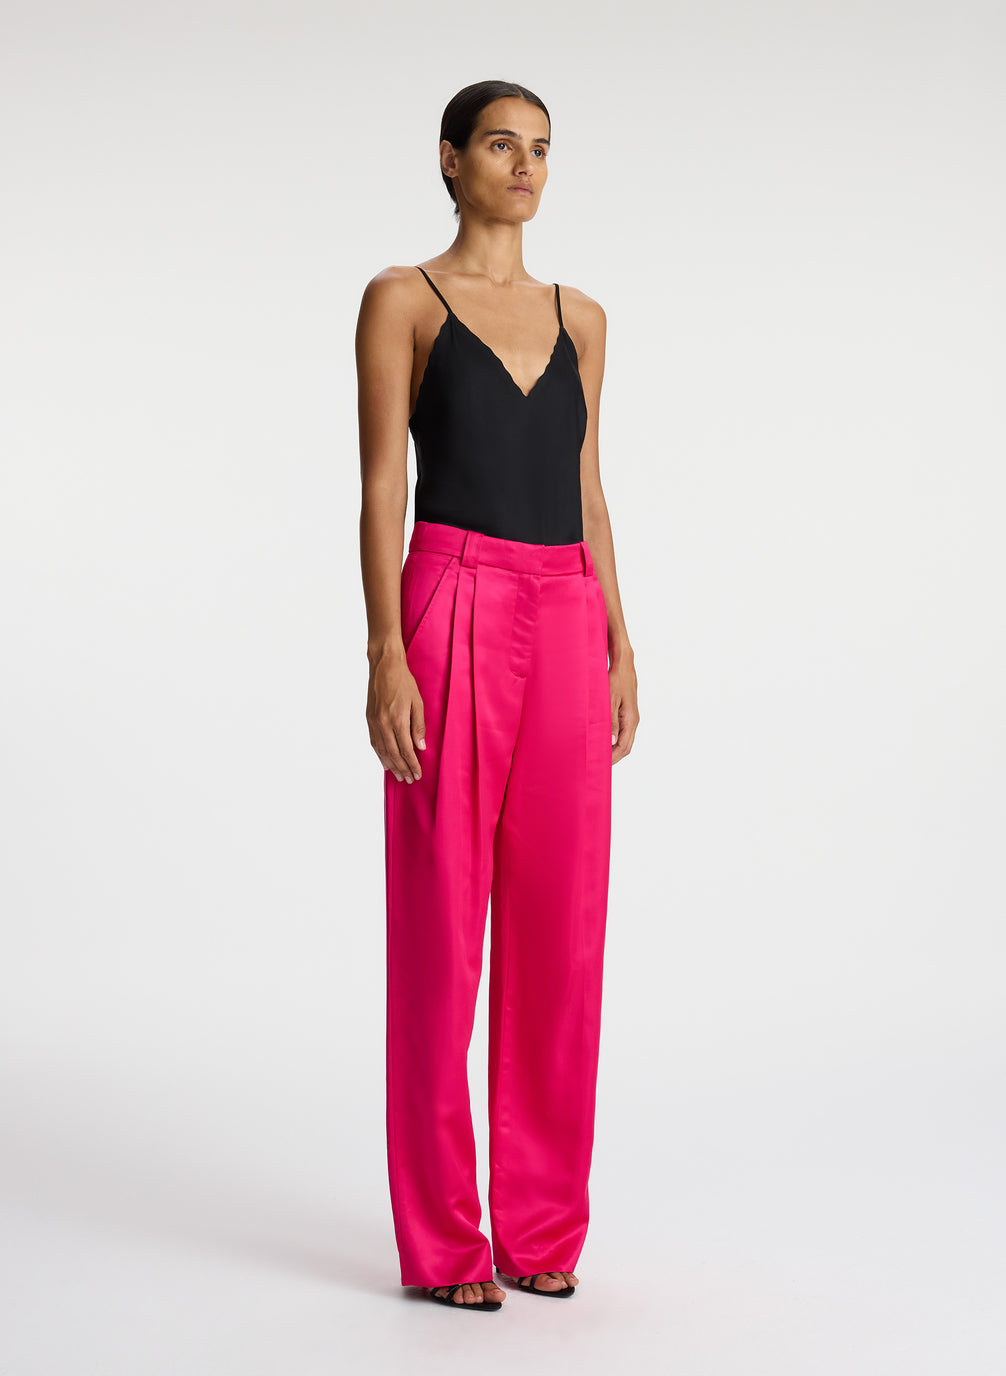 side view of woman wearing black satin camisole with bright pink satin pants